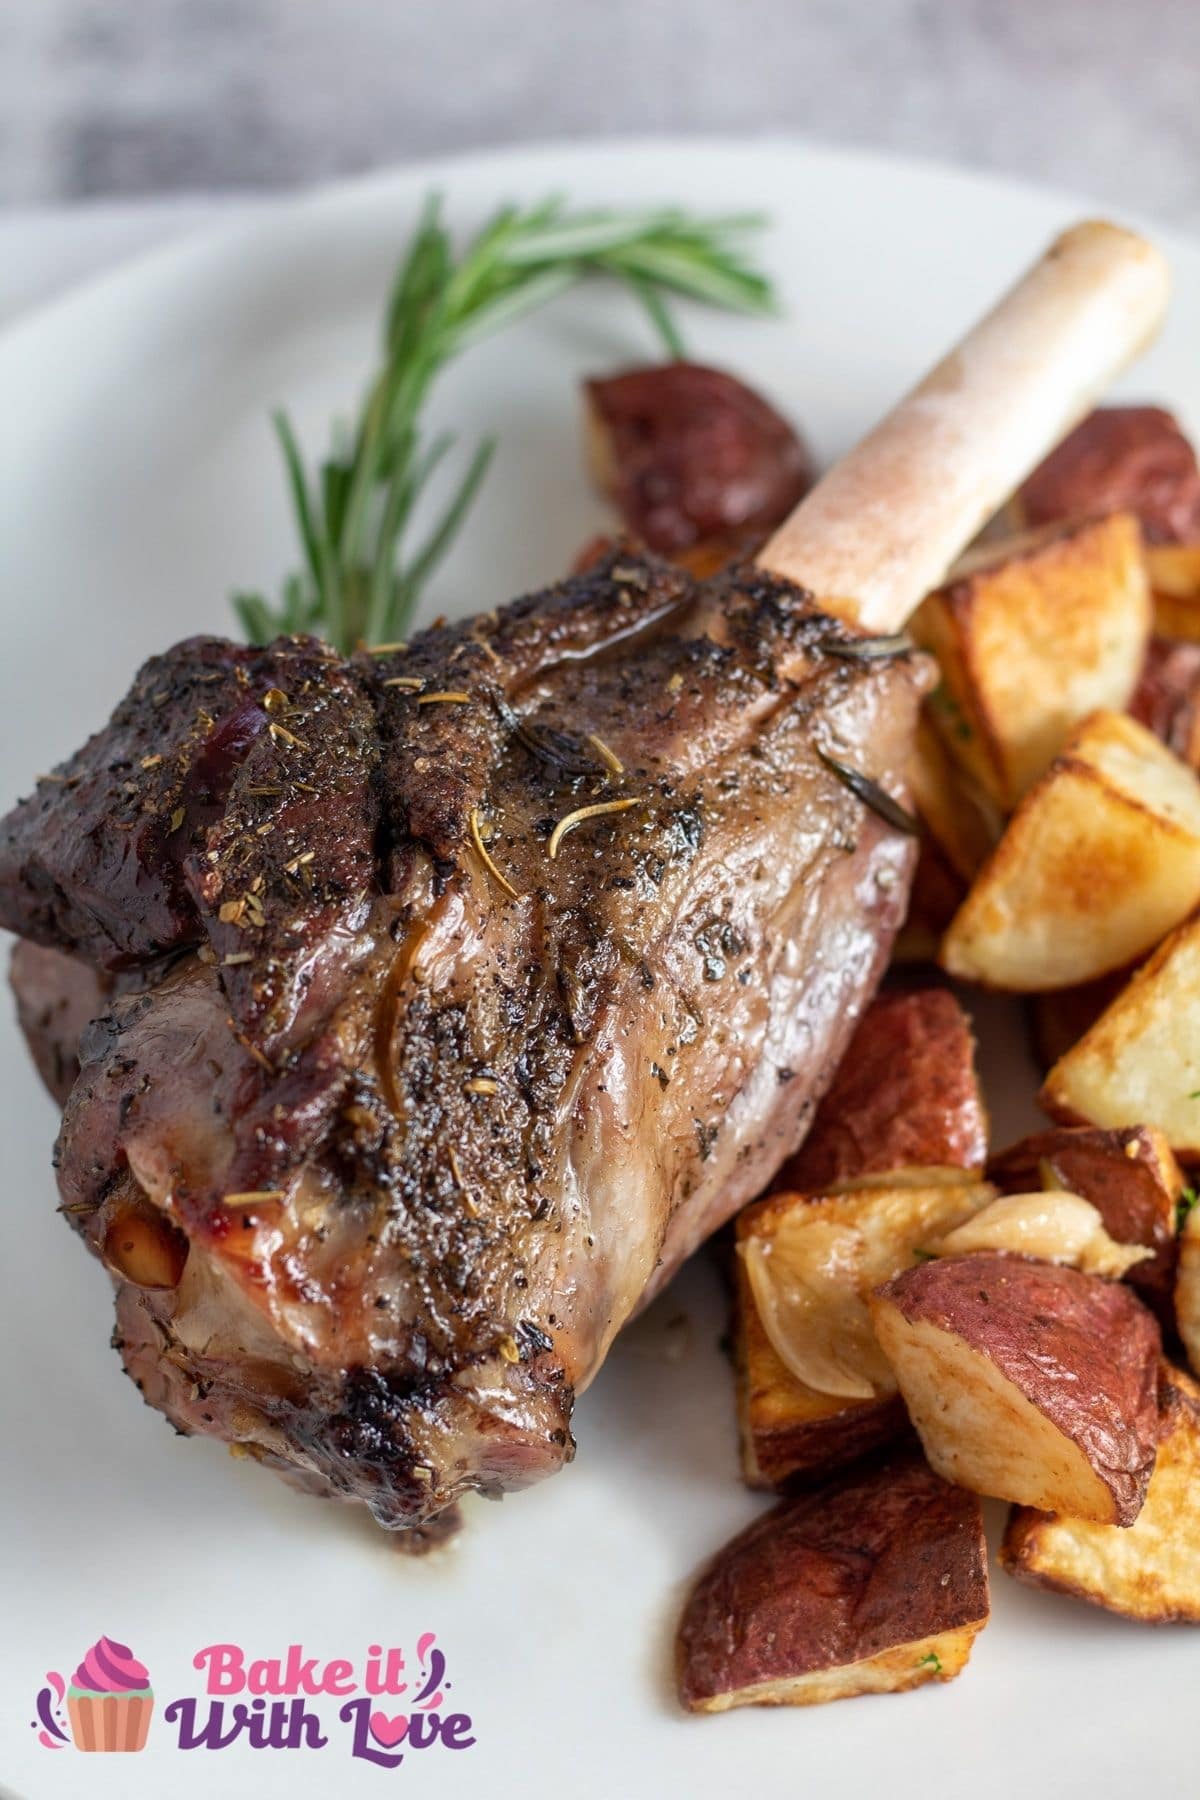 Tall image of roasted lamb shank on a white plate with roasted potatoes.